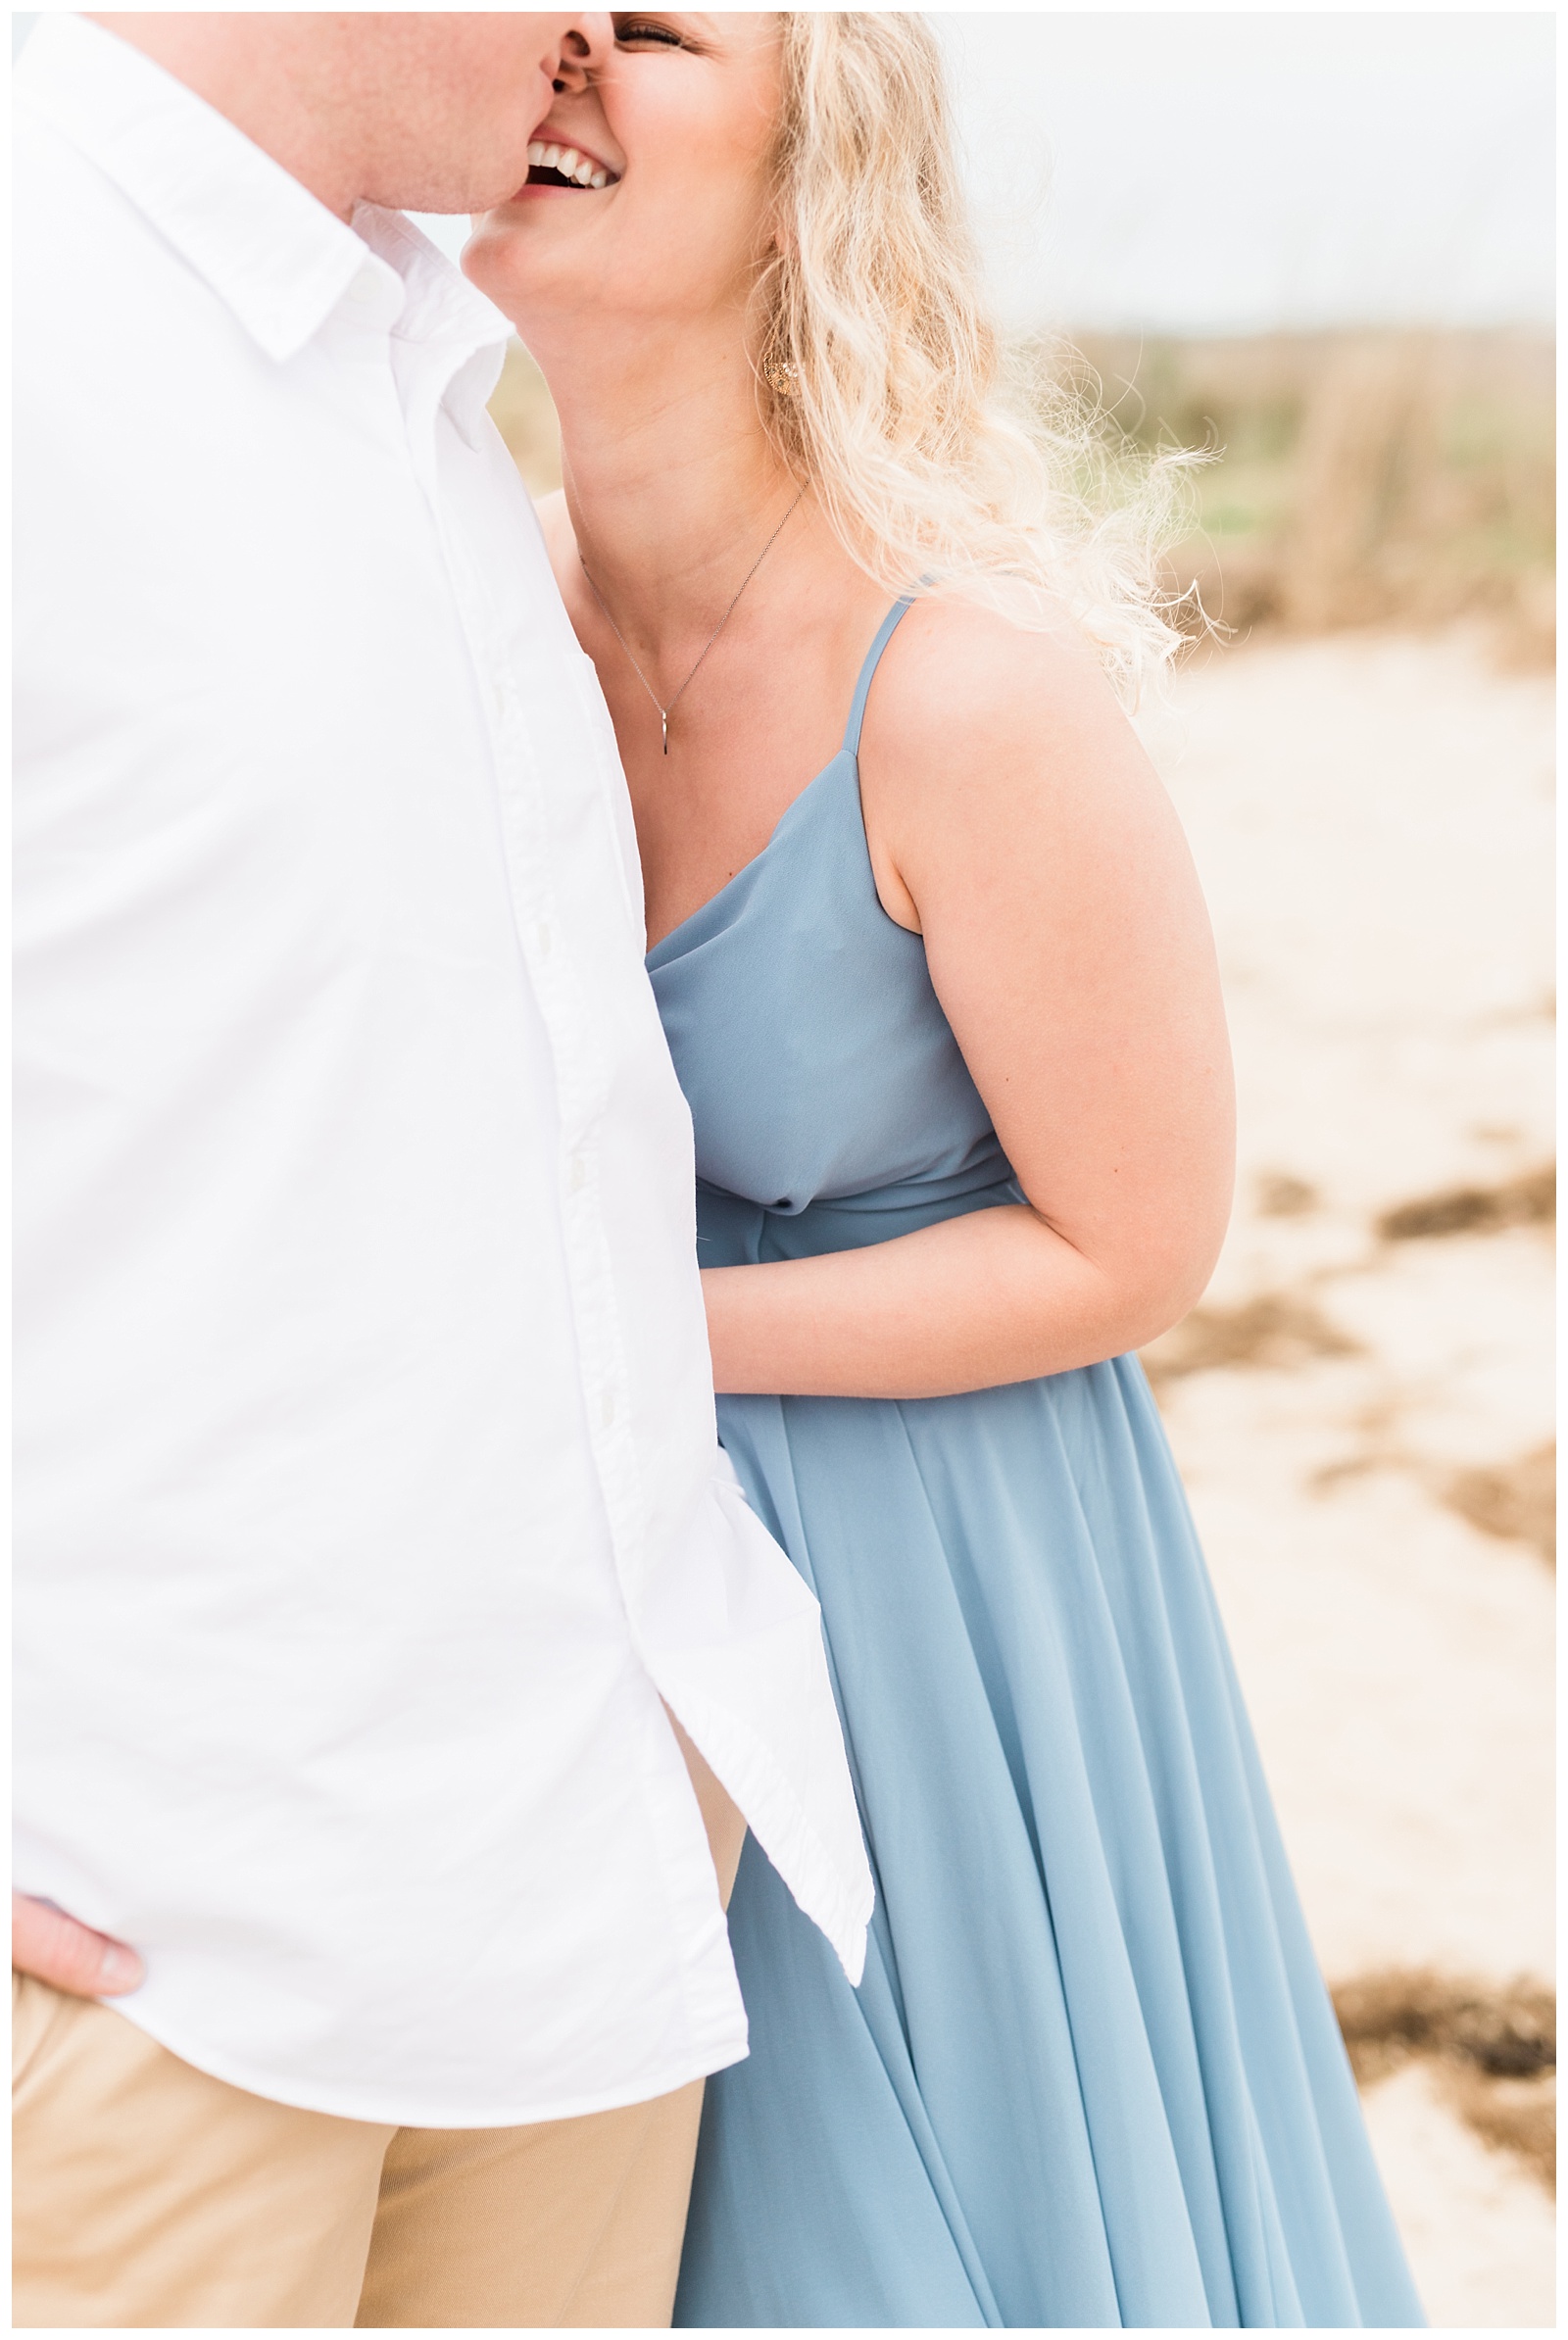 bethel-beach-natural-area-engagement-session-29.jpg